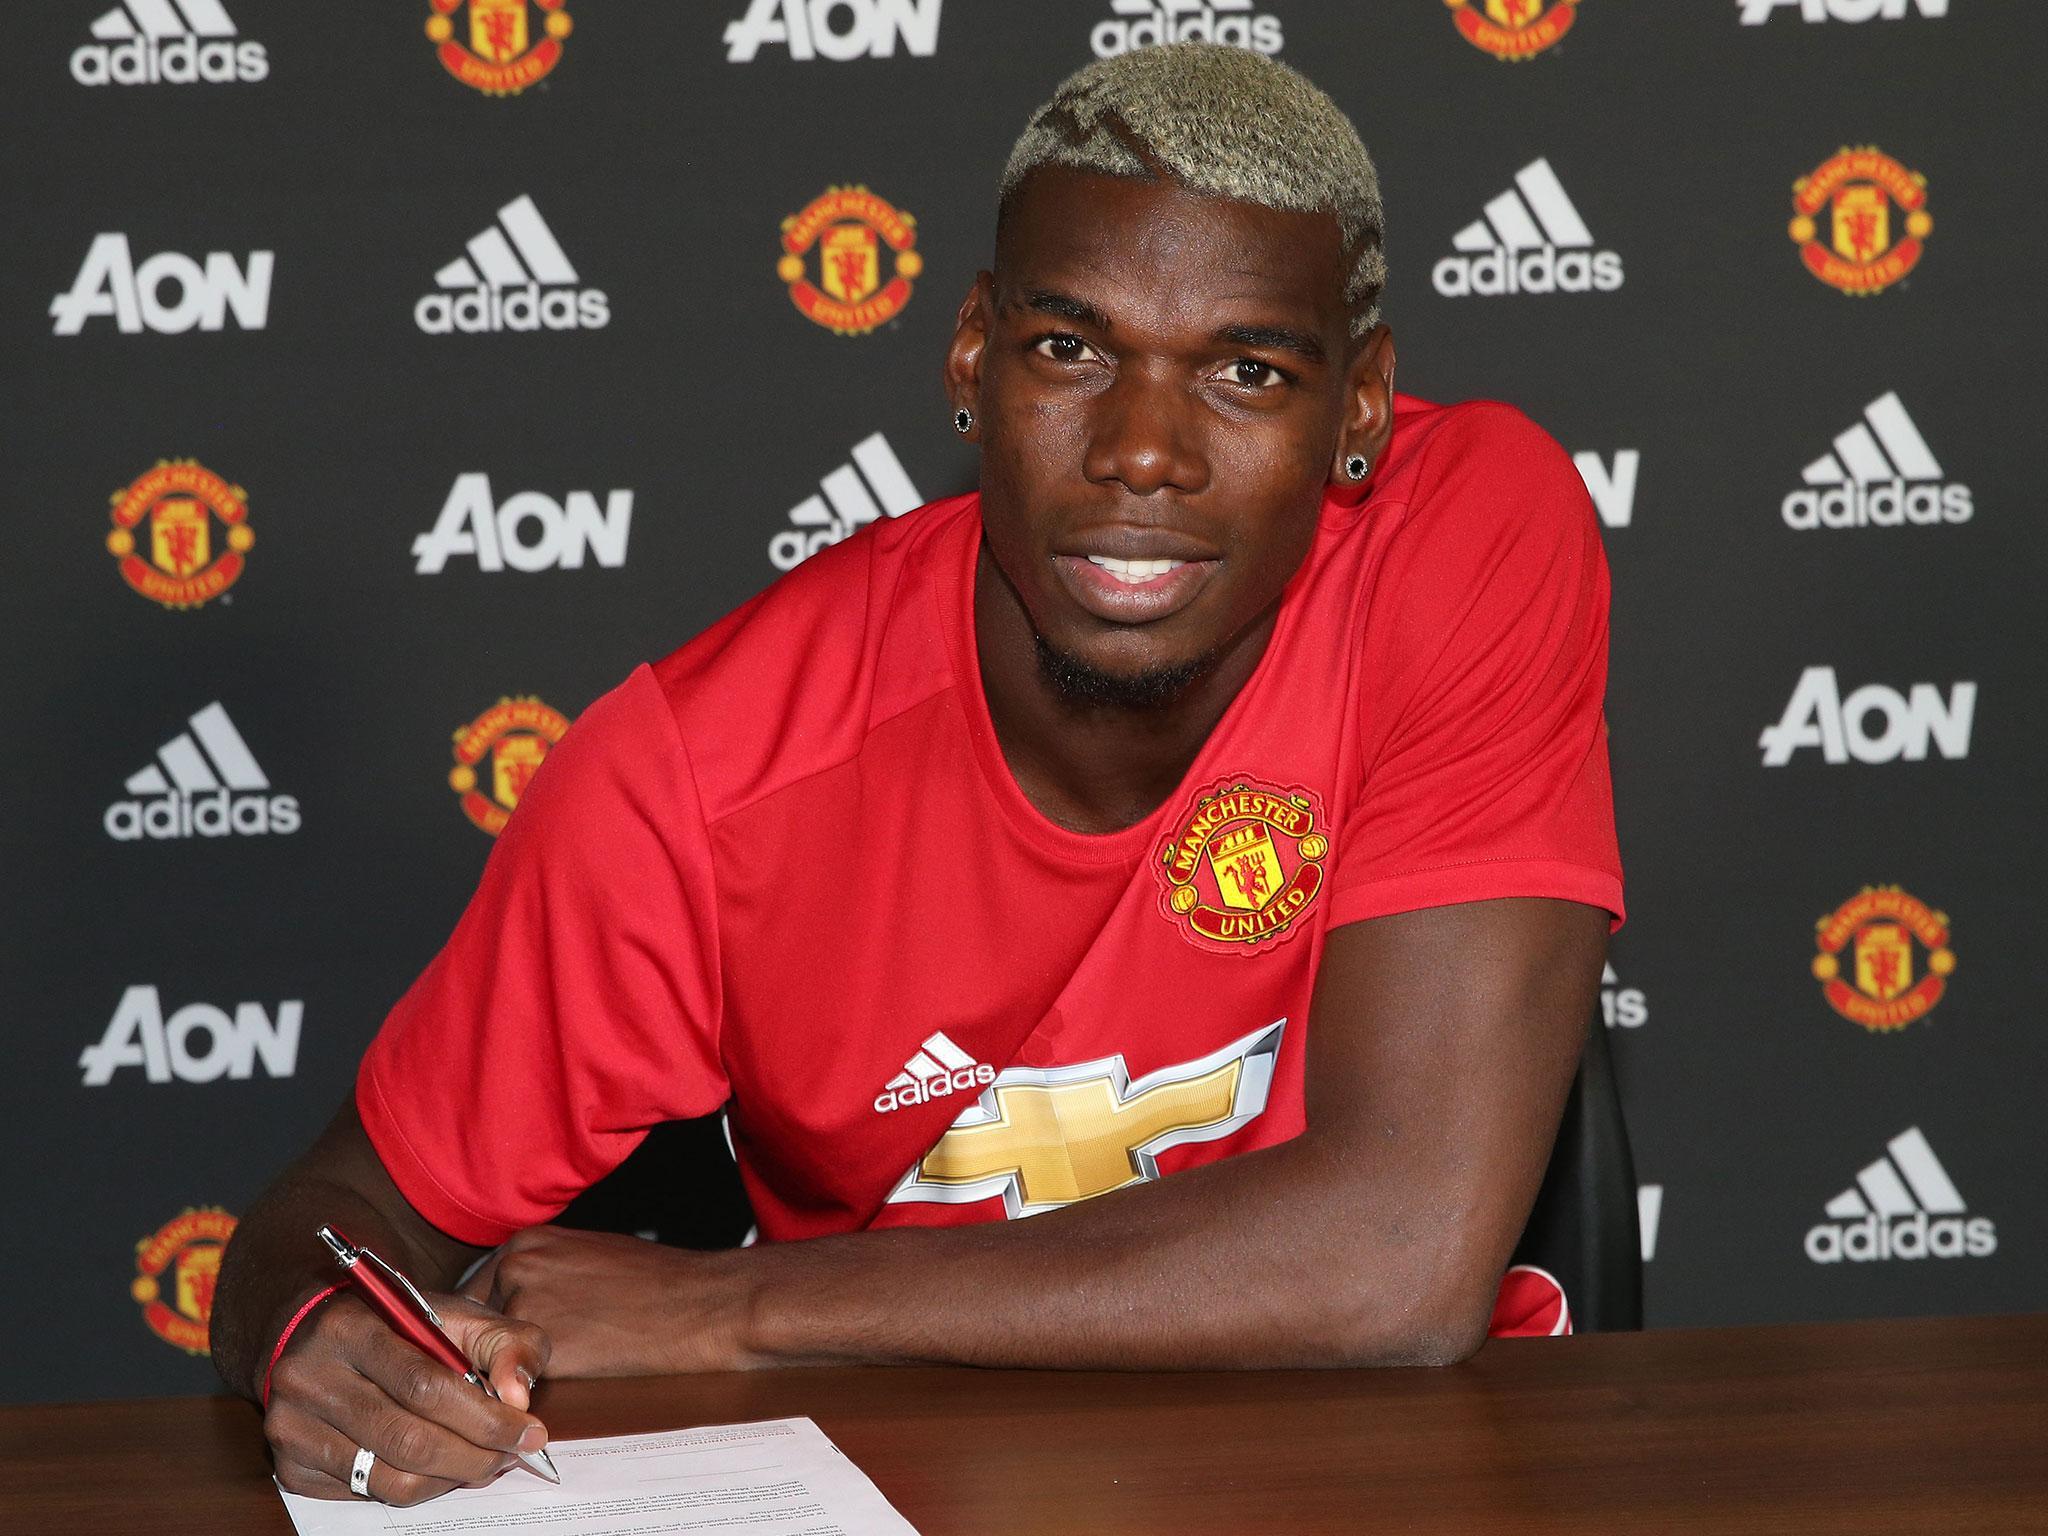 Paul Pogba's world record move to Manchester United now looks cheap by the standards of this summer